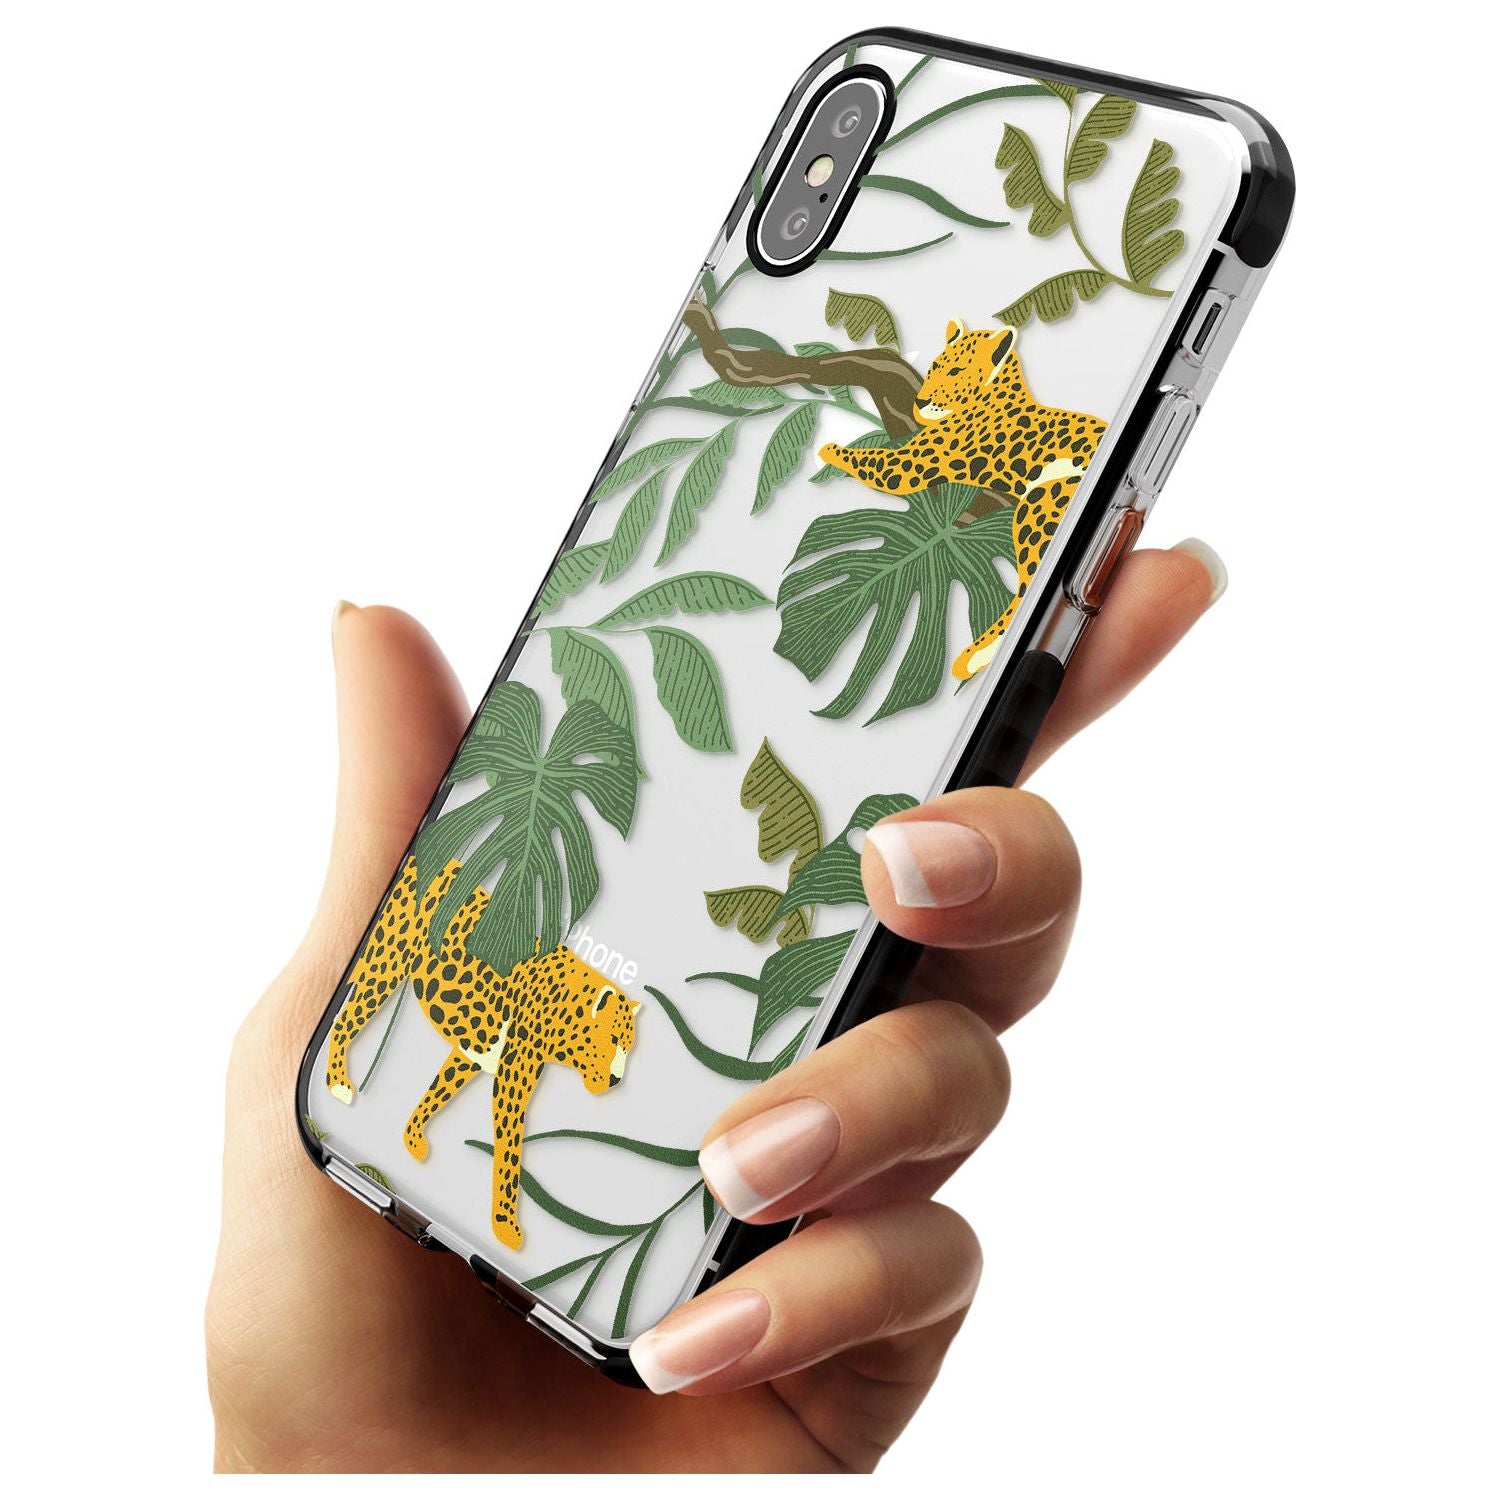 Two Jaguars & Foliage Jungle Cat Pattern Black Impact Phone Case for iPhone X XS Max XR